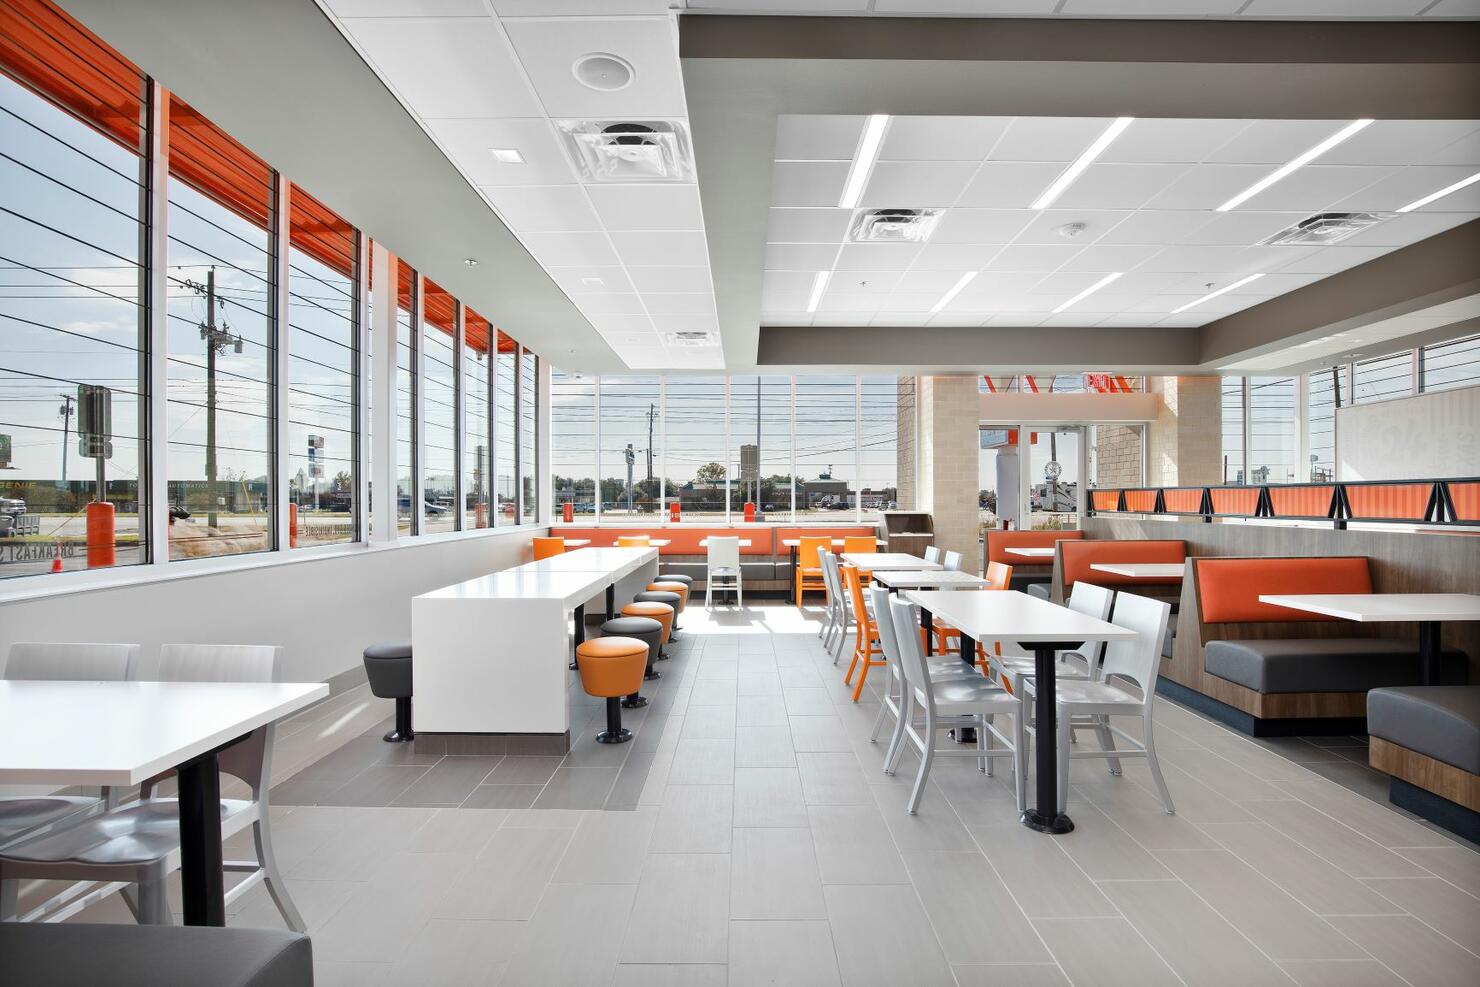 Whataburger opens first-of-kind restaurant in Bellmead